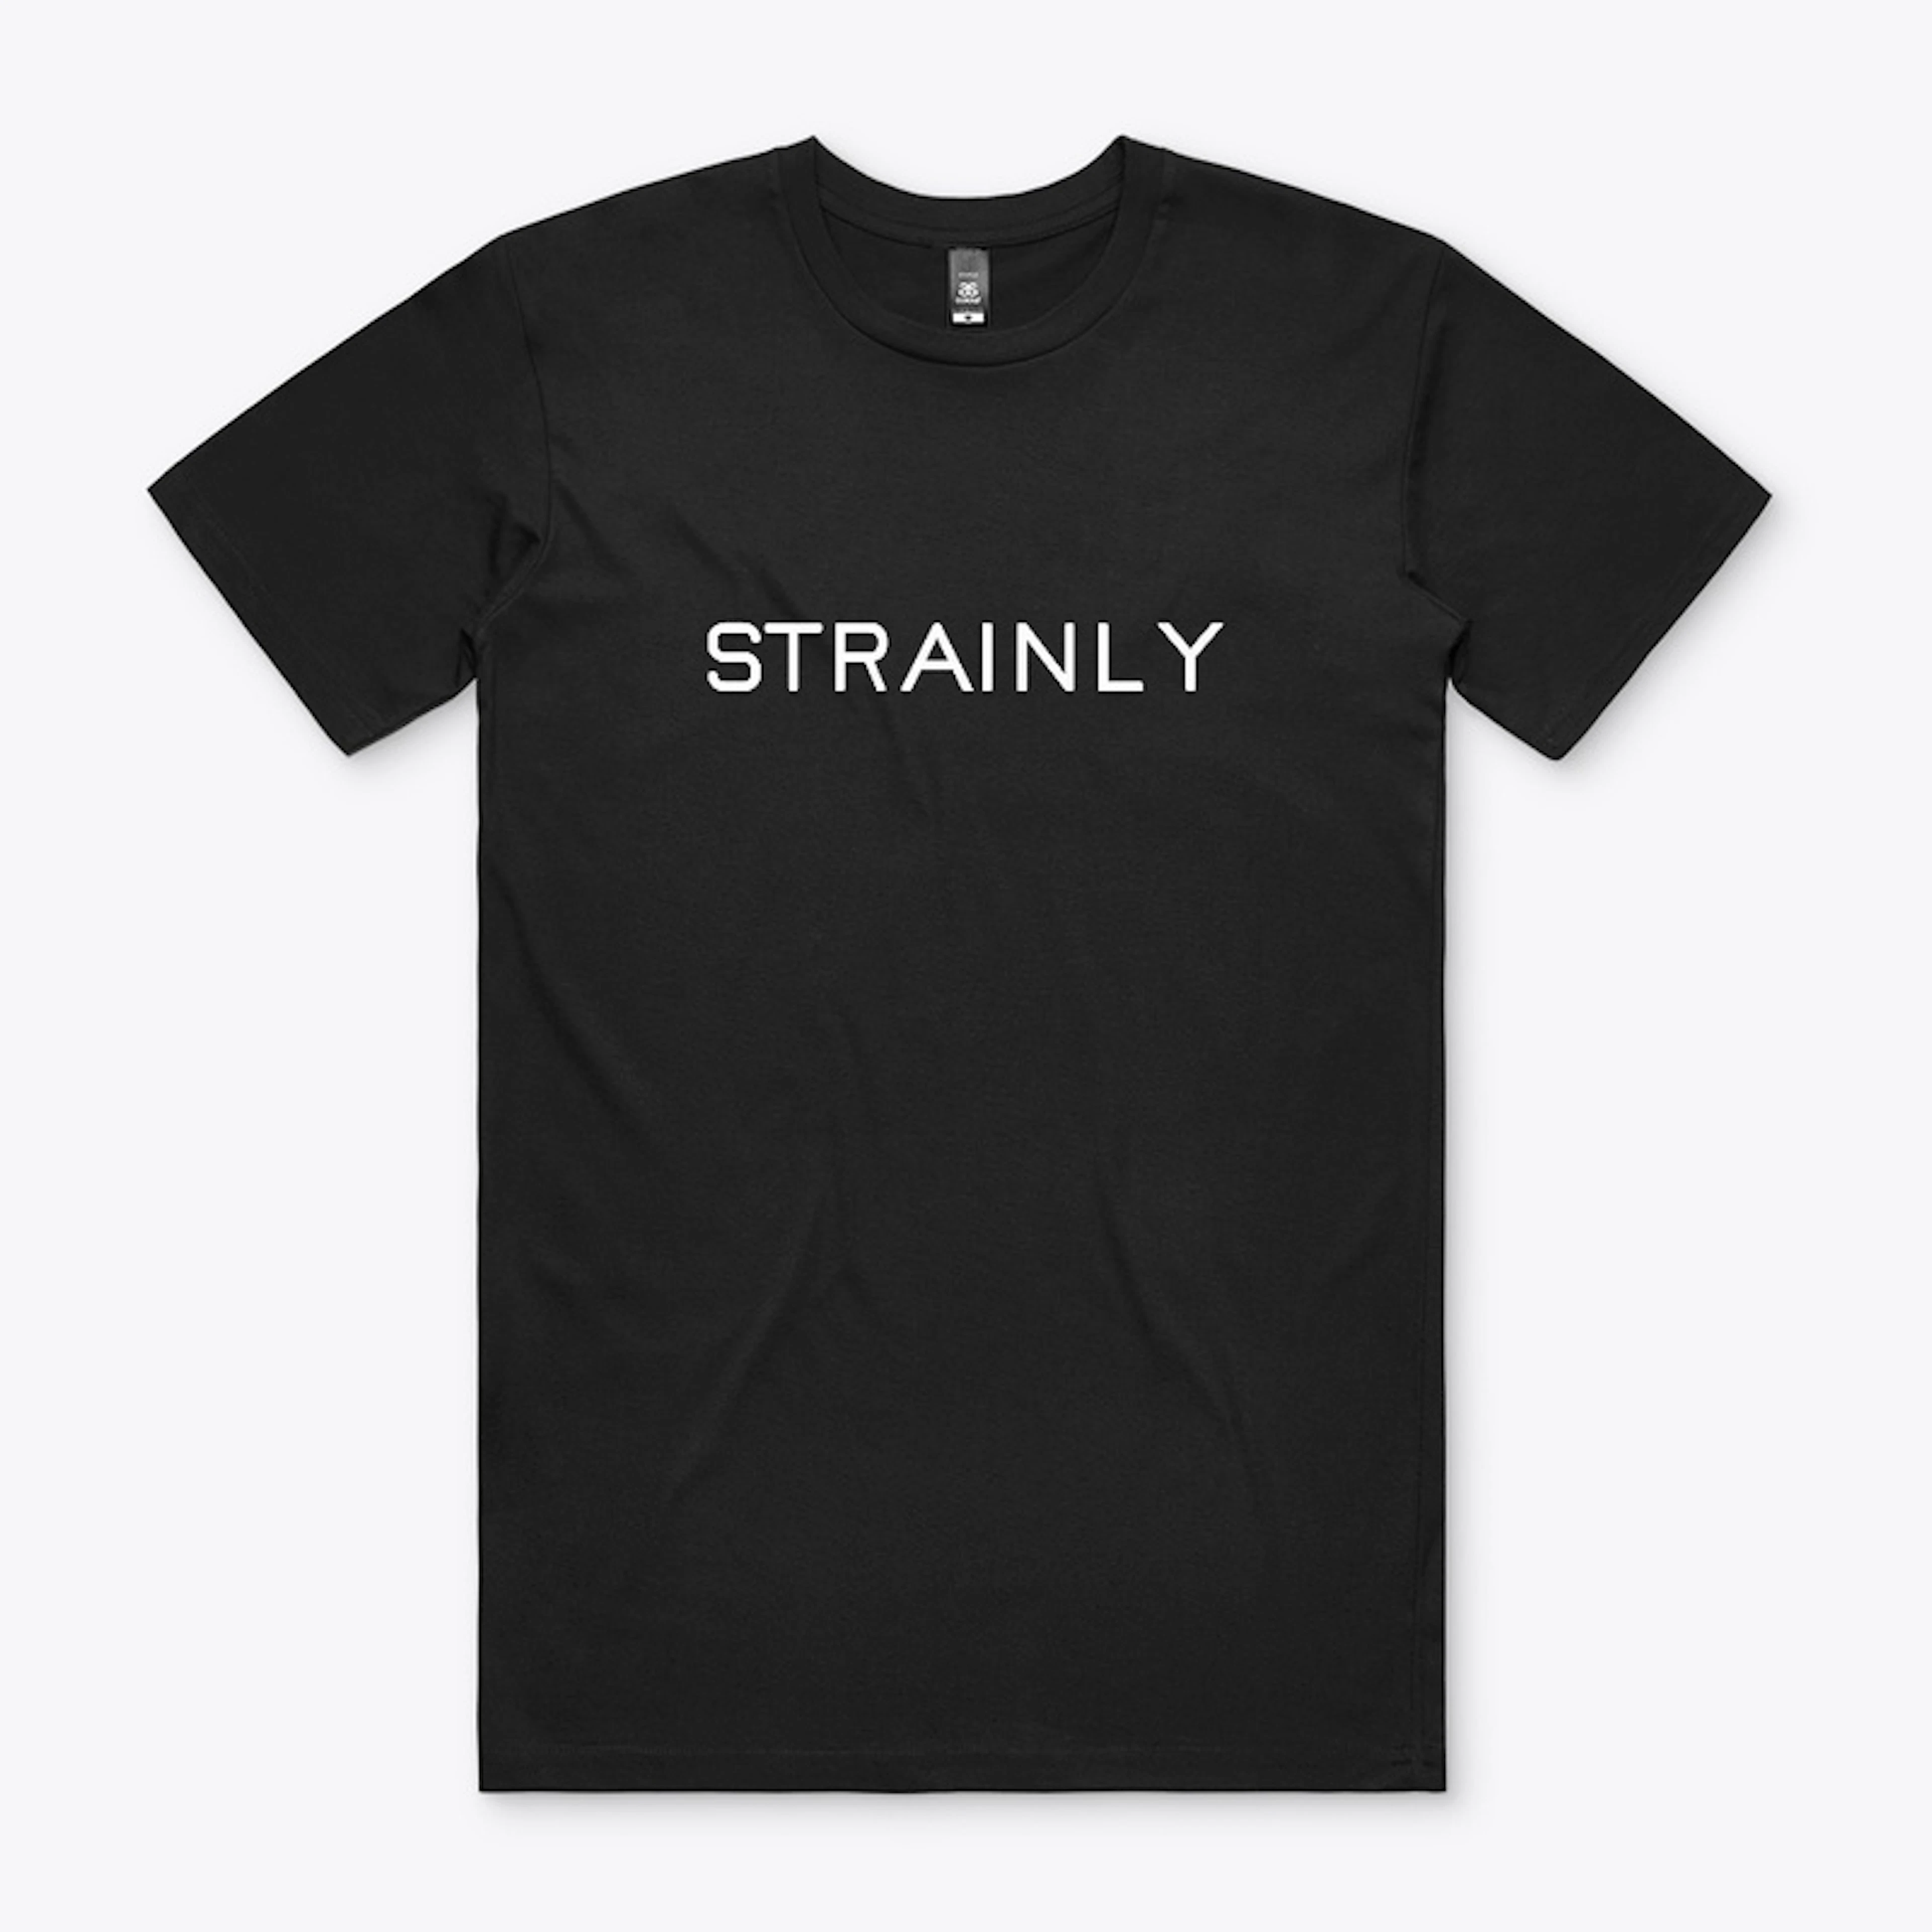 Strainly "dystopia" Tee